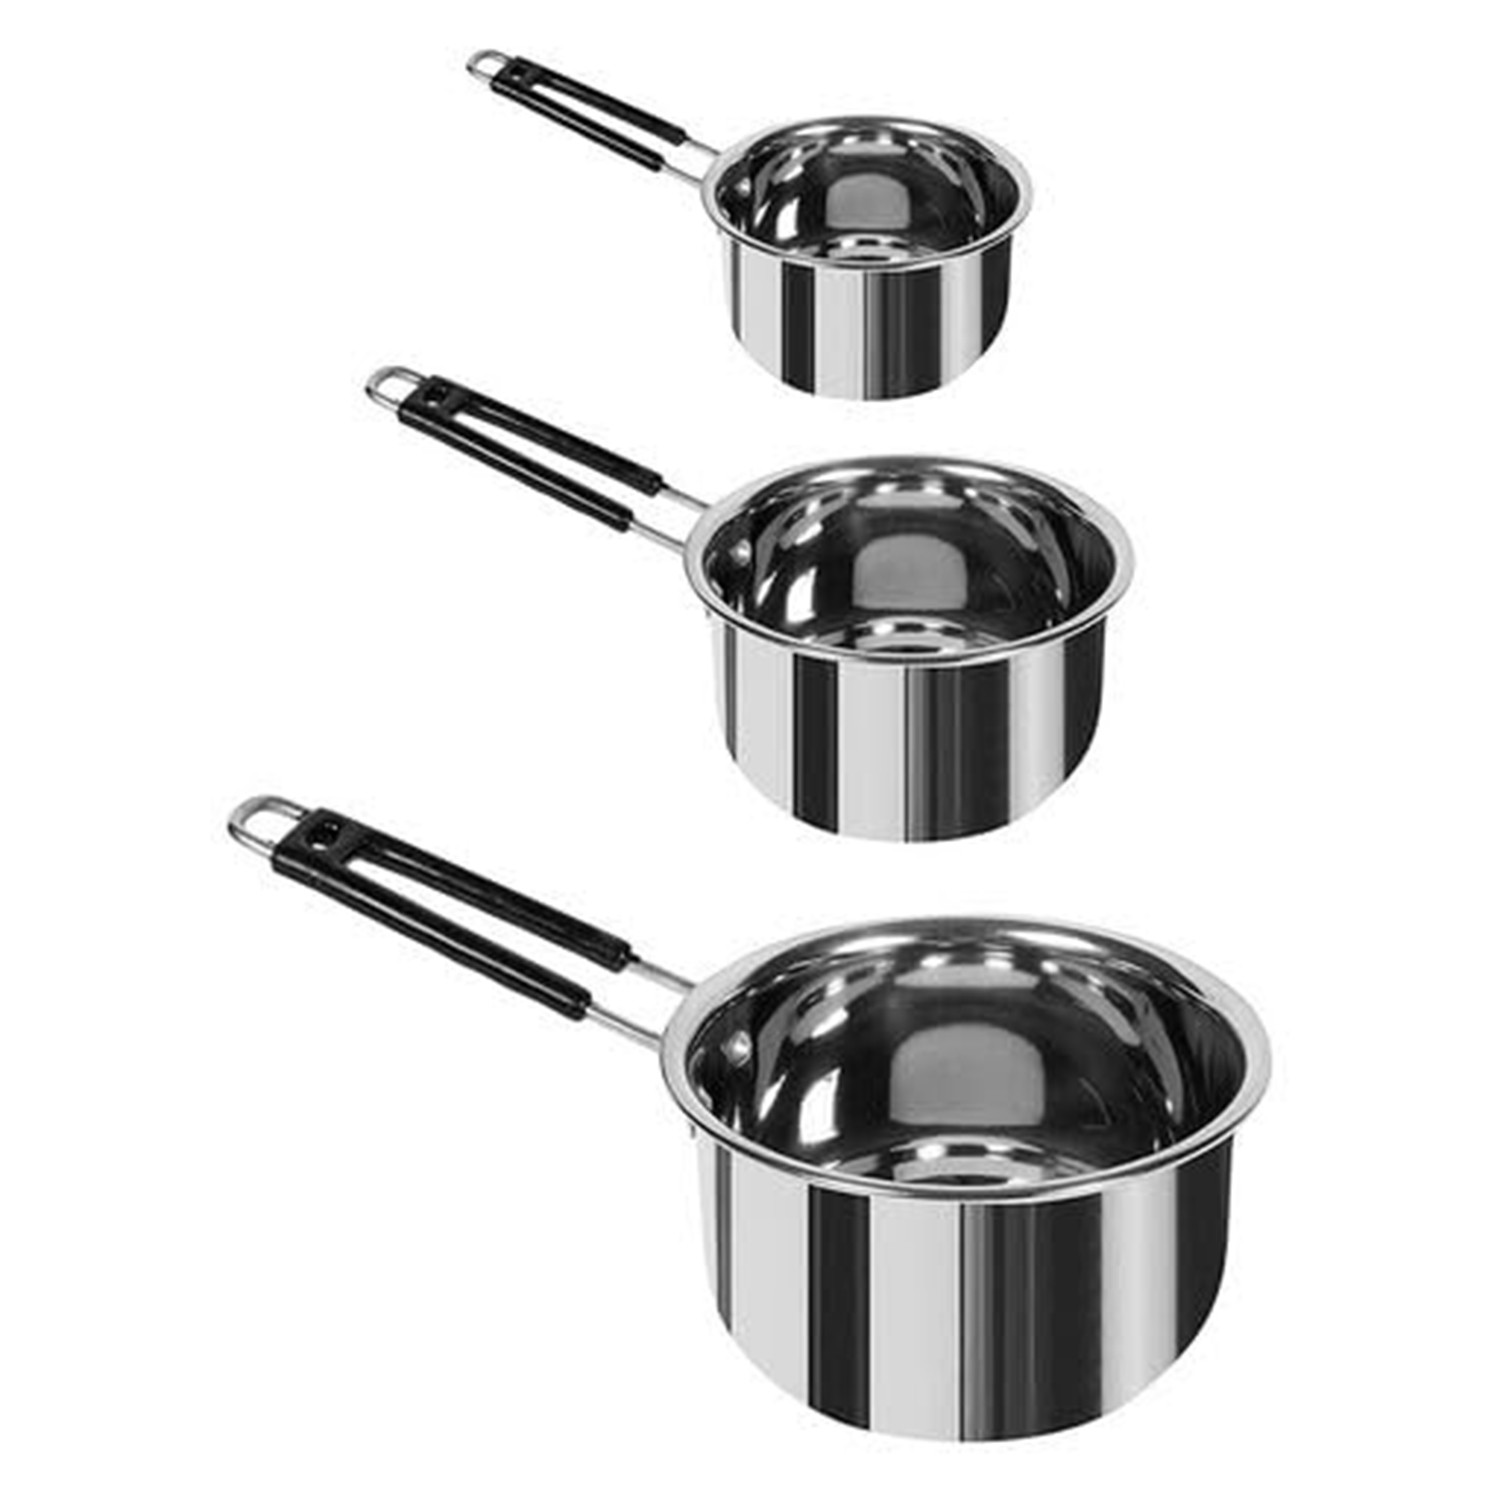 Kuber Industries Set of 3 Stainless Steel Saucepan/Tea Pan I 1.1 L, 1.5 L, 2.2 L Capacity I Silicon Handle I Thick Base for Boiling Milk & Tea I Heavy Duty Gauge I Tapeli Patila, Sauce Pot Cookware